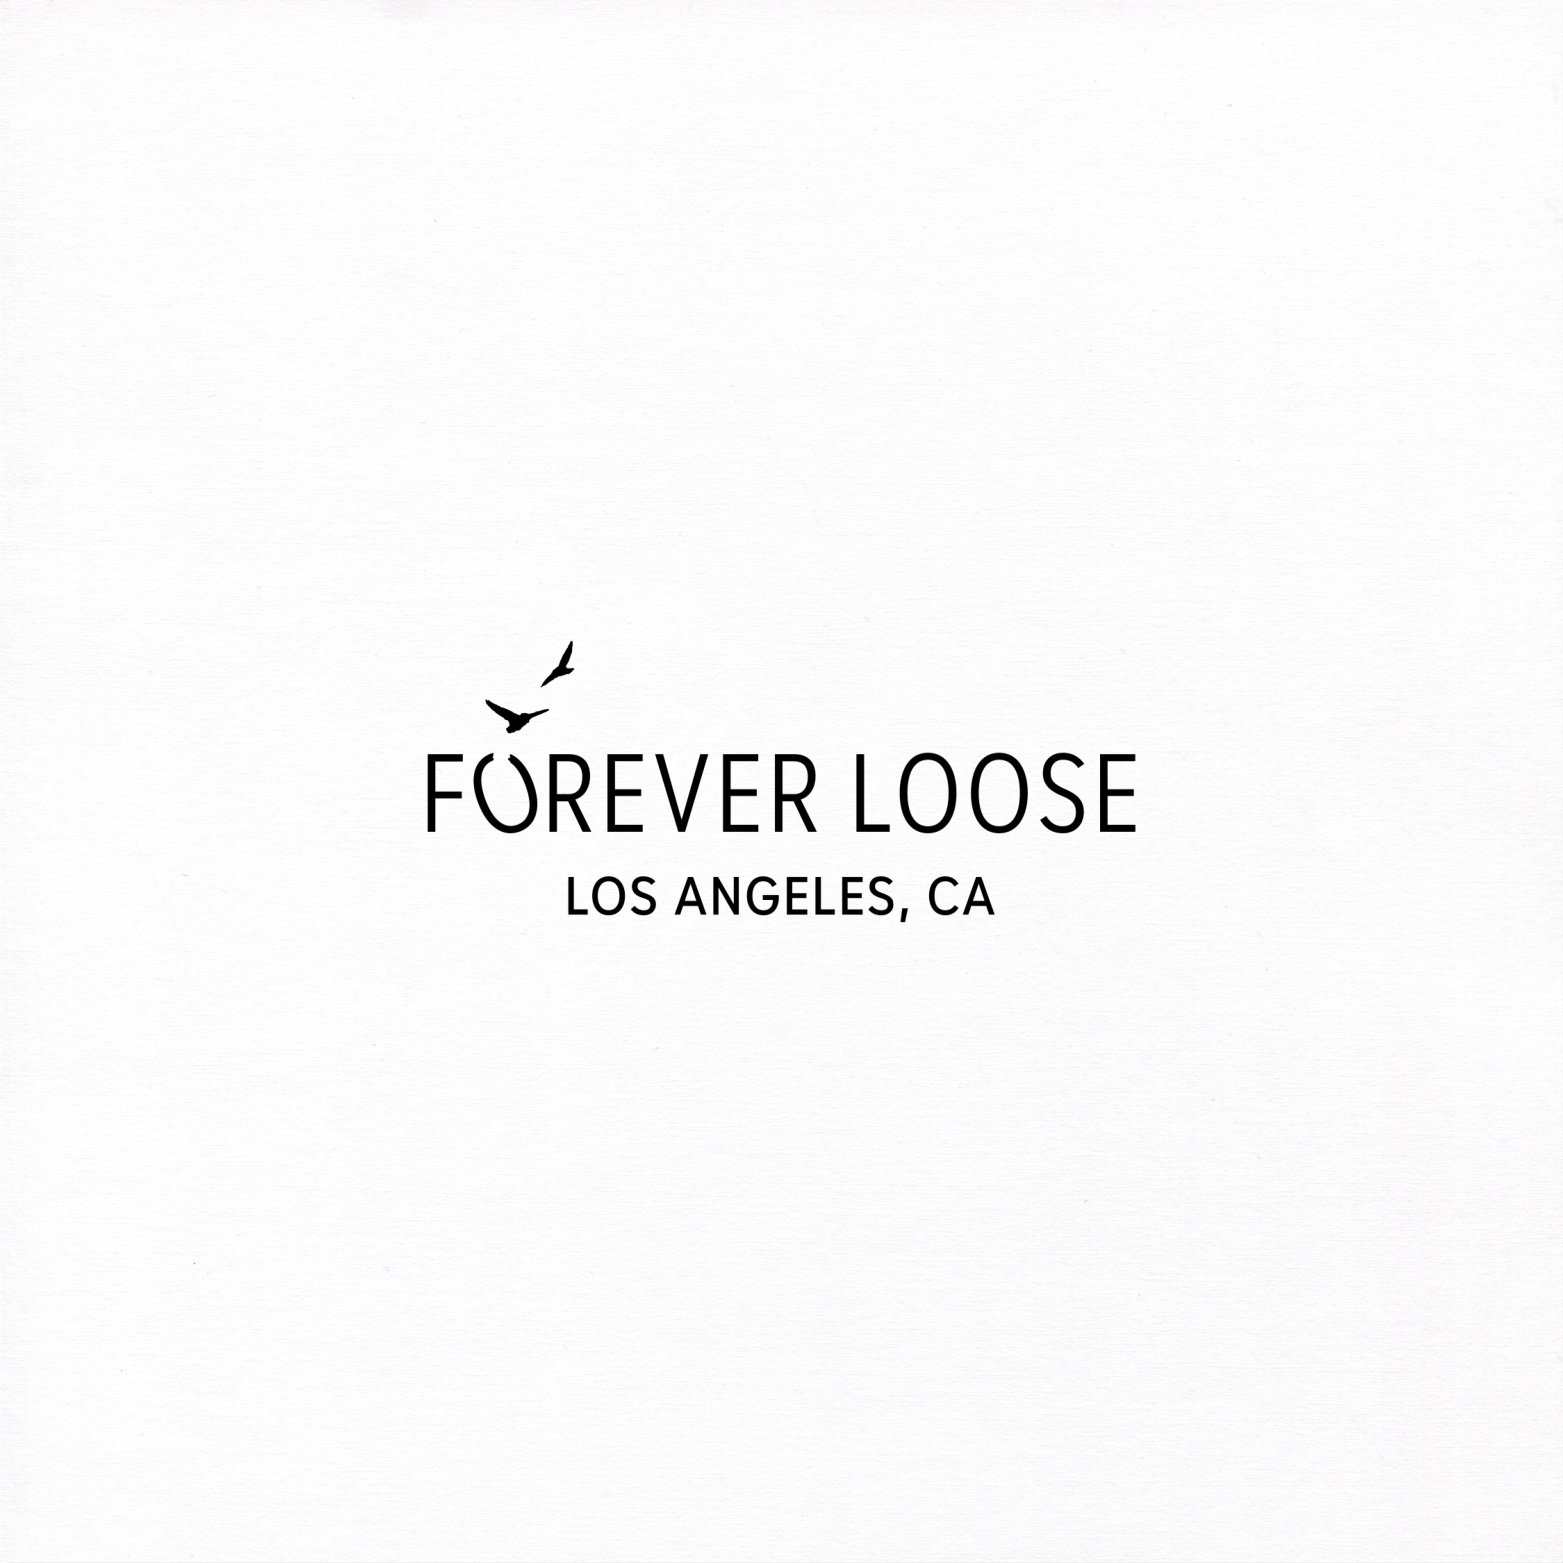 FOREVER LOOSE